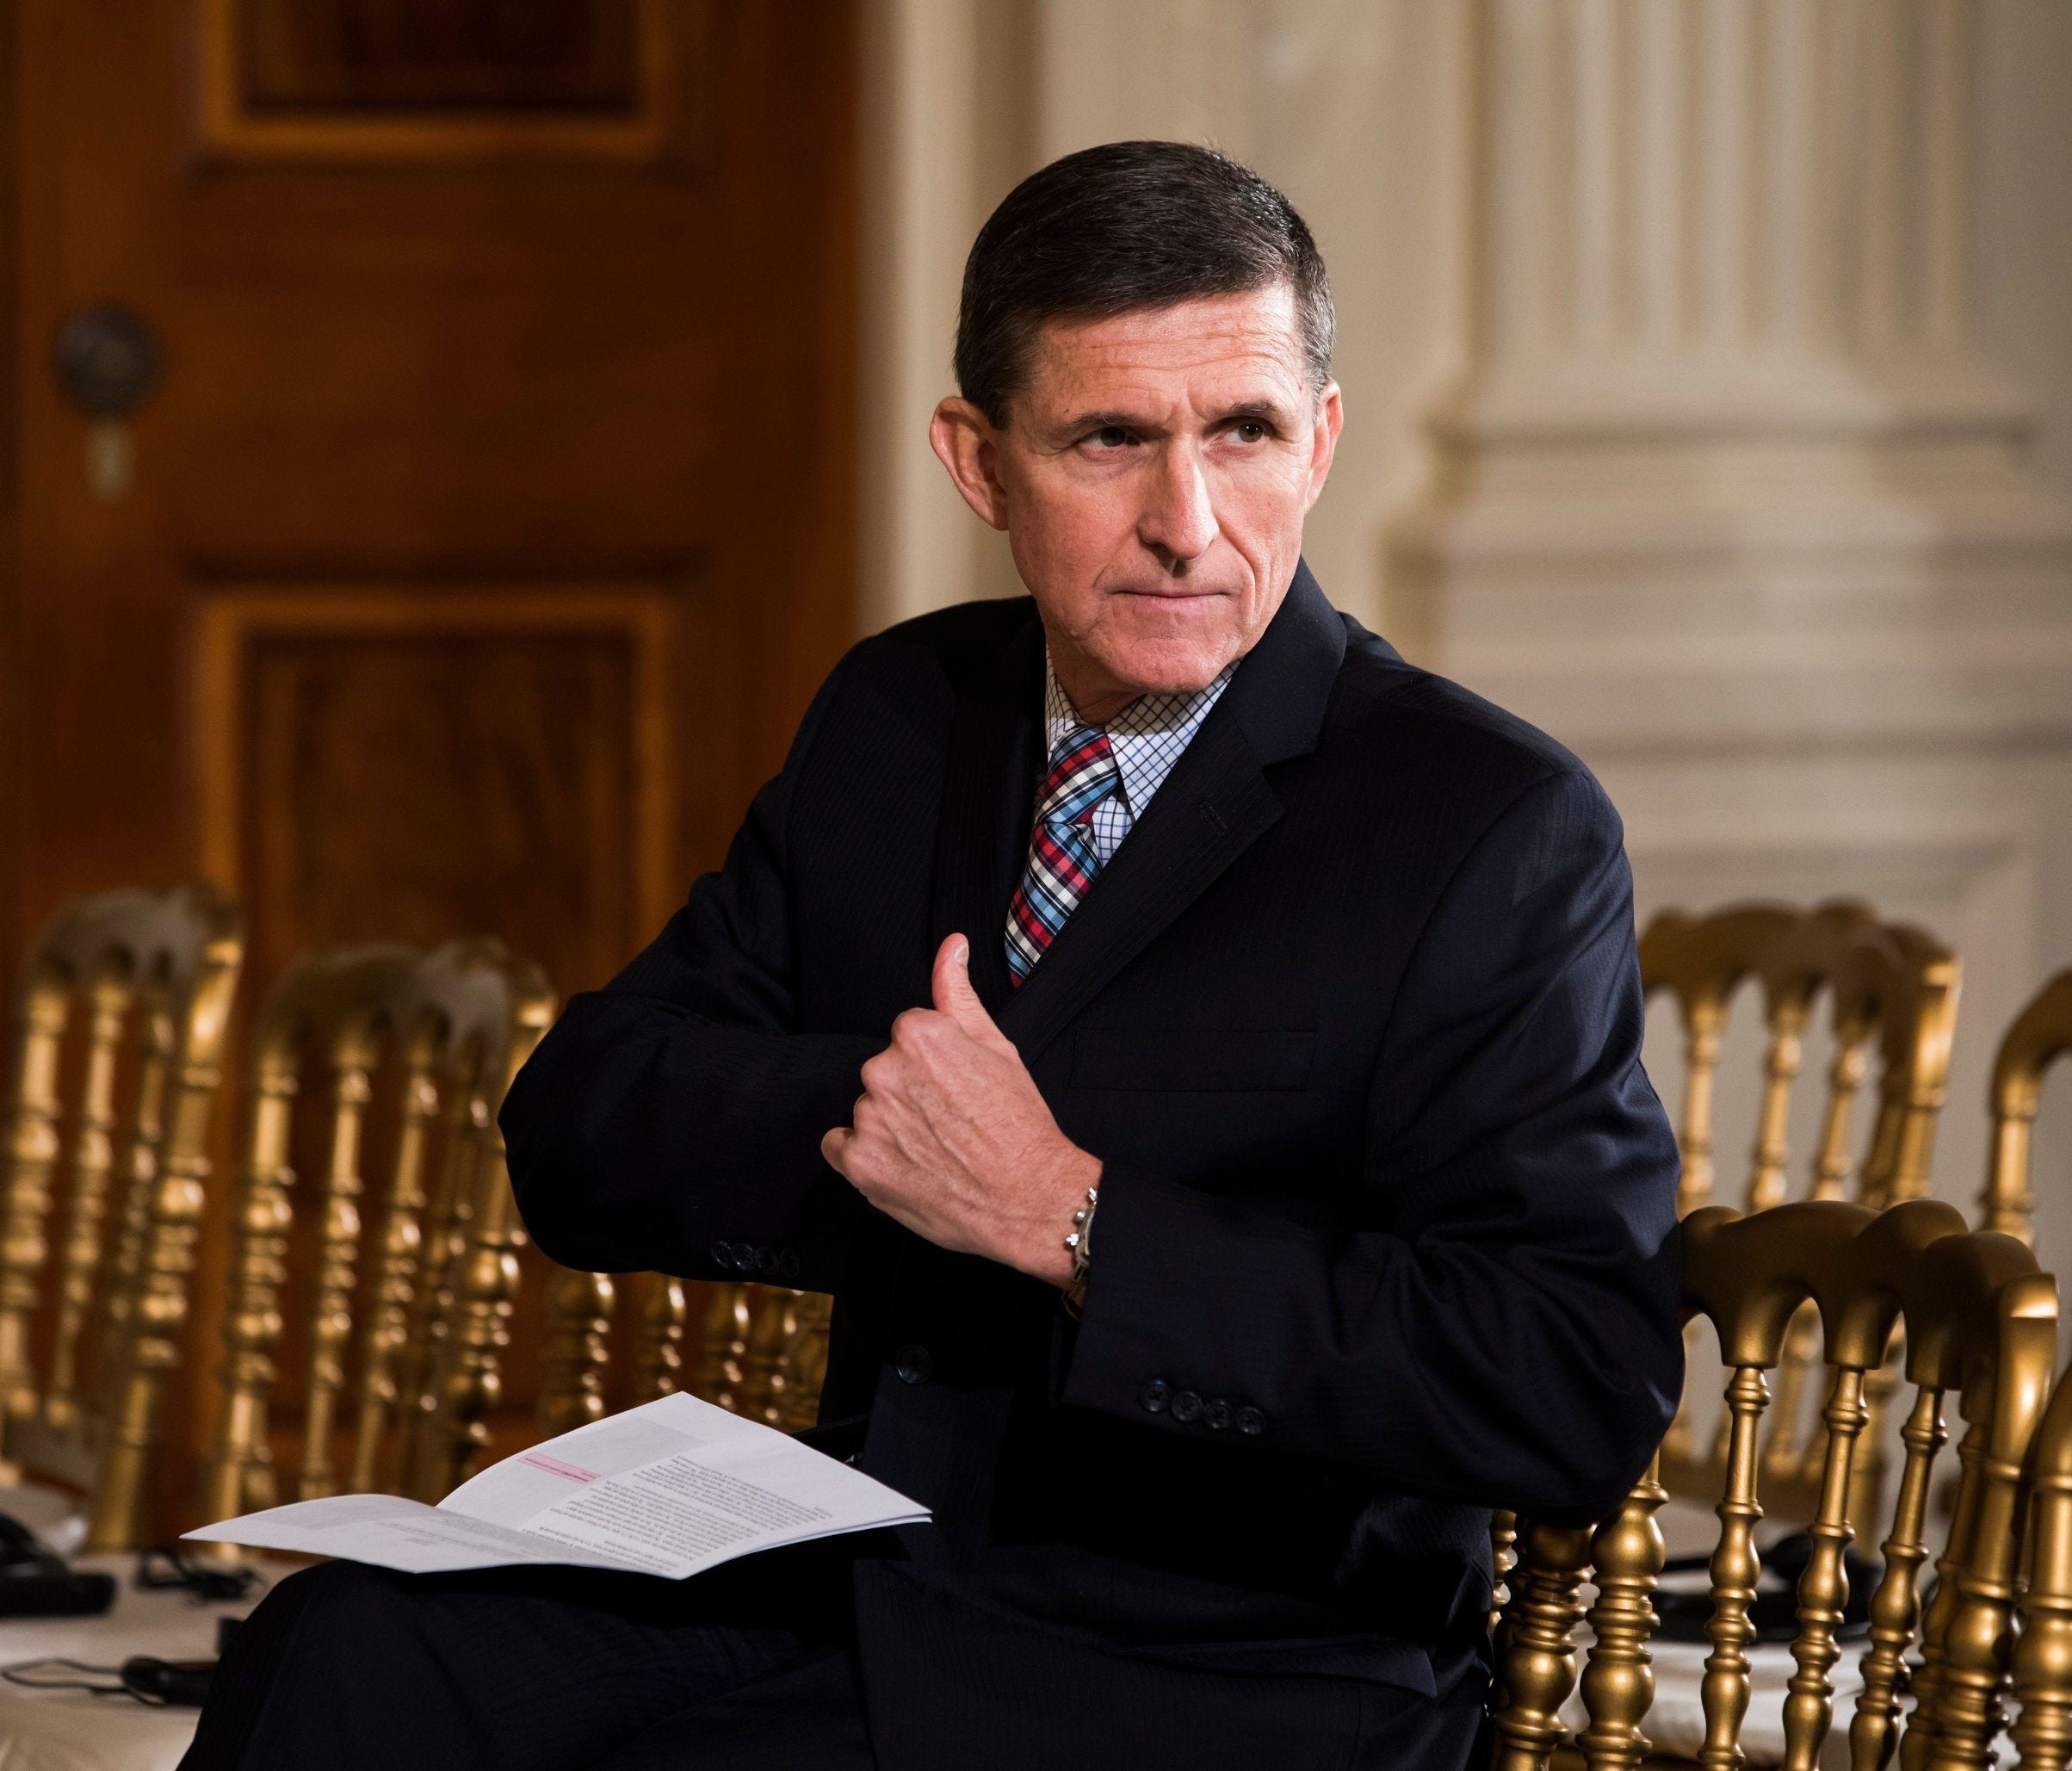 Michael Flynn, then National Security Adviser to President Trump, attends a press conference with Japanese Prime Minister Shinzo Abe in the East Room of the White House on Feb 10, 2017.